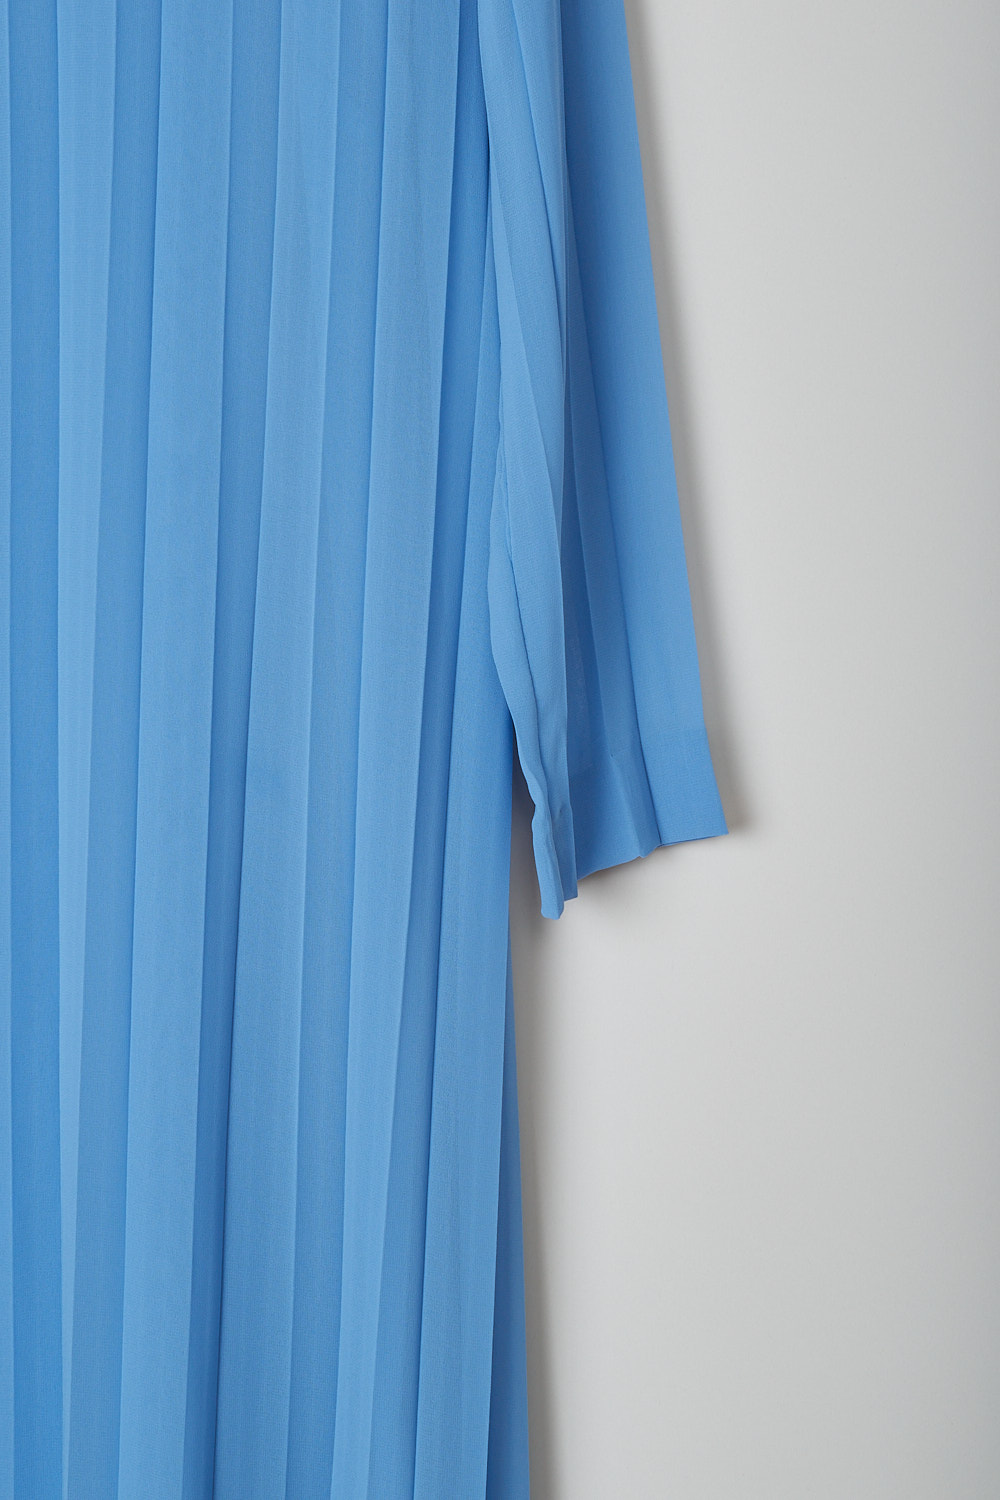 DRIES VAN NOTEN, SKY BLUE PLEATED DELAVITA DRESS, DELAVITA_6265_WW_DRESS_SKY, Blue, Detail, This sky blue semi sheer Delavita dress is fully pleated. The dress has a high round neckline an three-quarter sleeves. The straight hemline reaches to below the knee. In the back, a hook-and-eye and concealed zip in the centre function as the closure option. The dress comes with a separate slip dress in the same fabric and color.   
